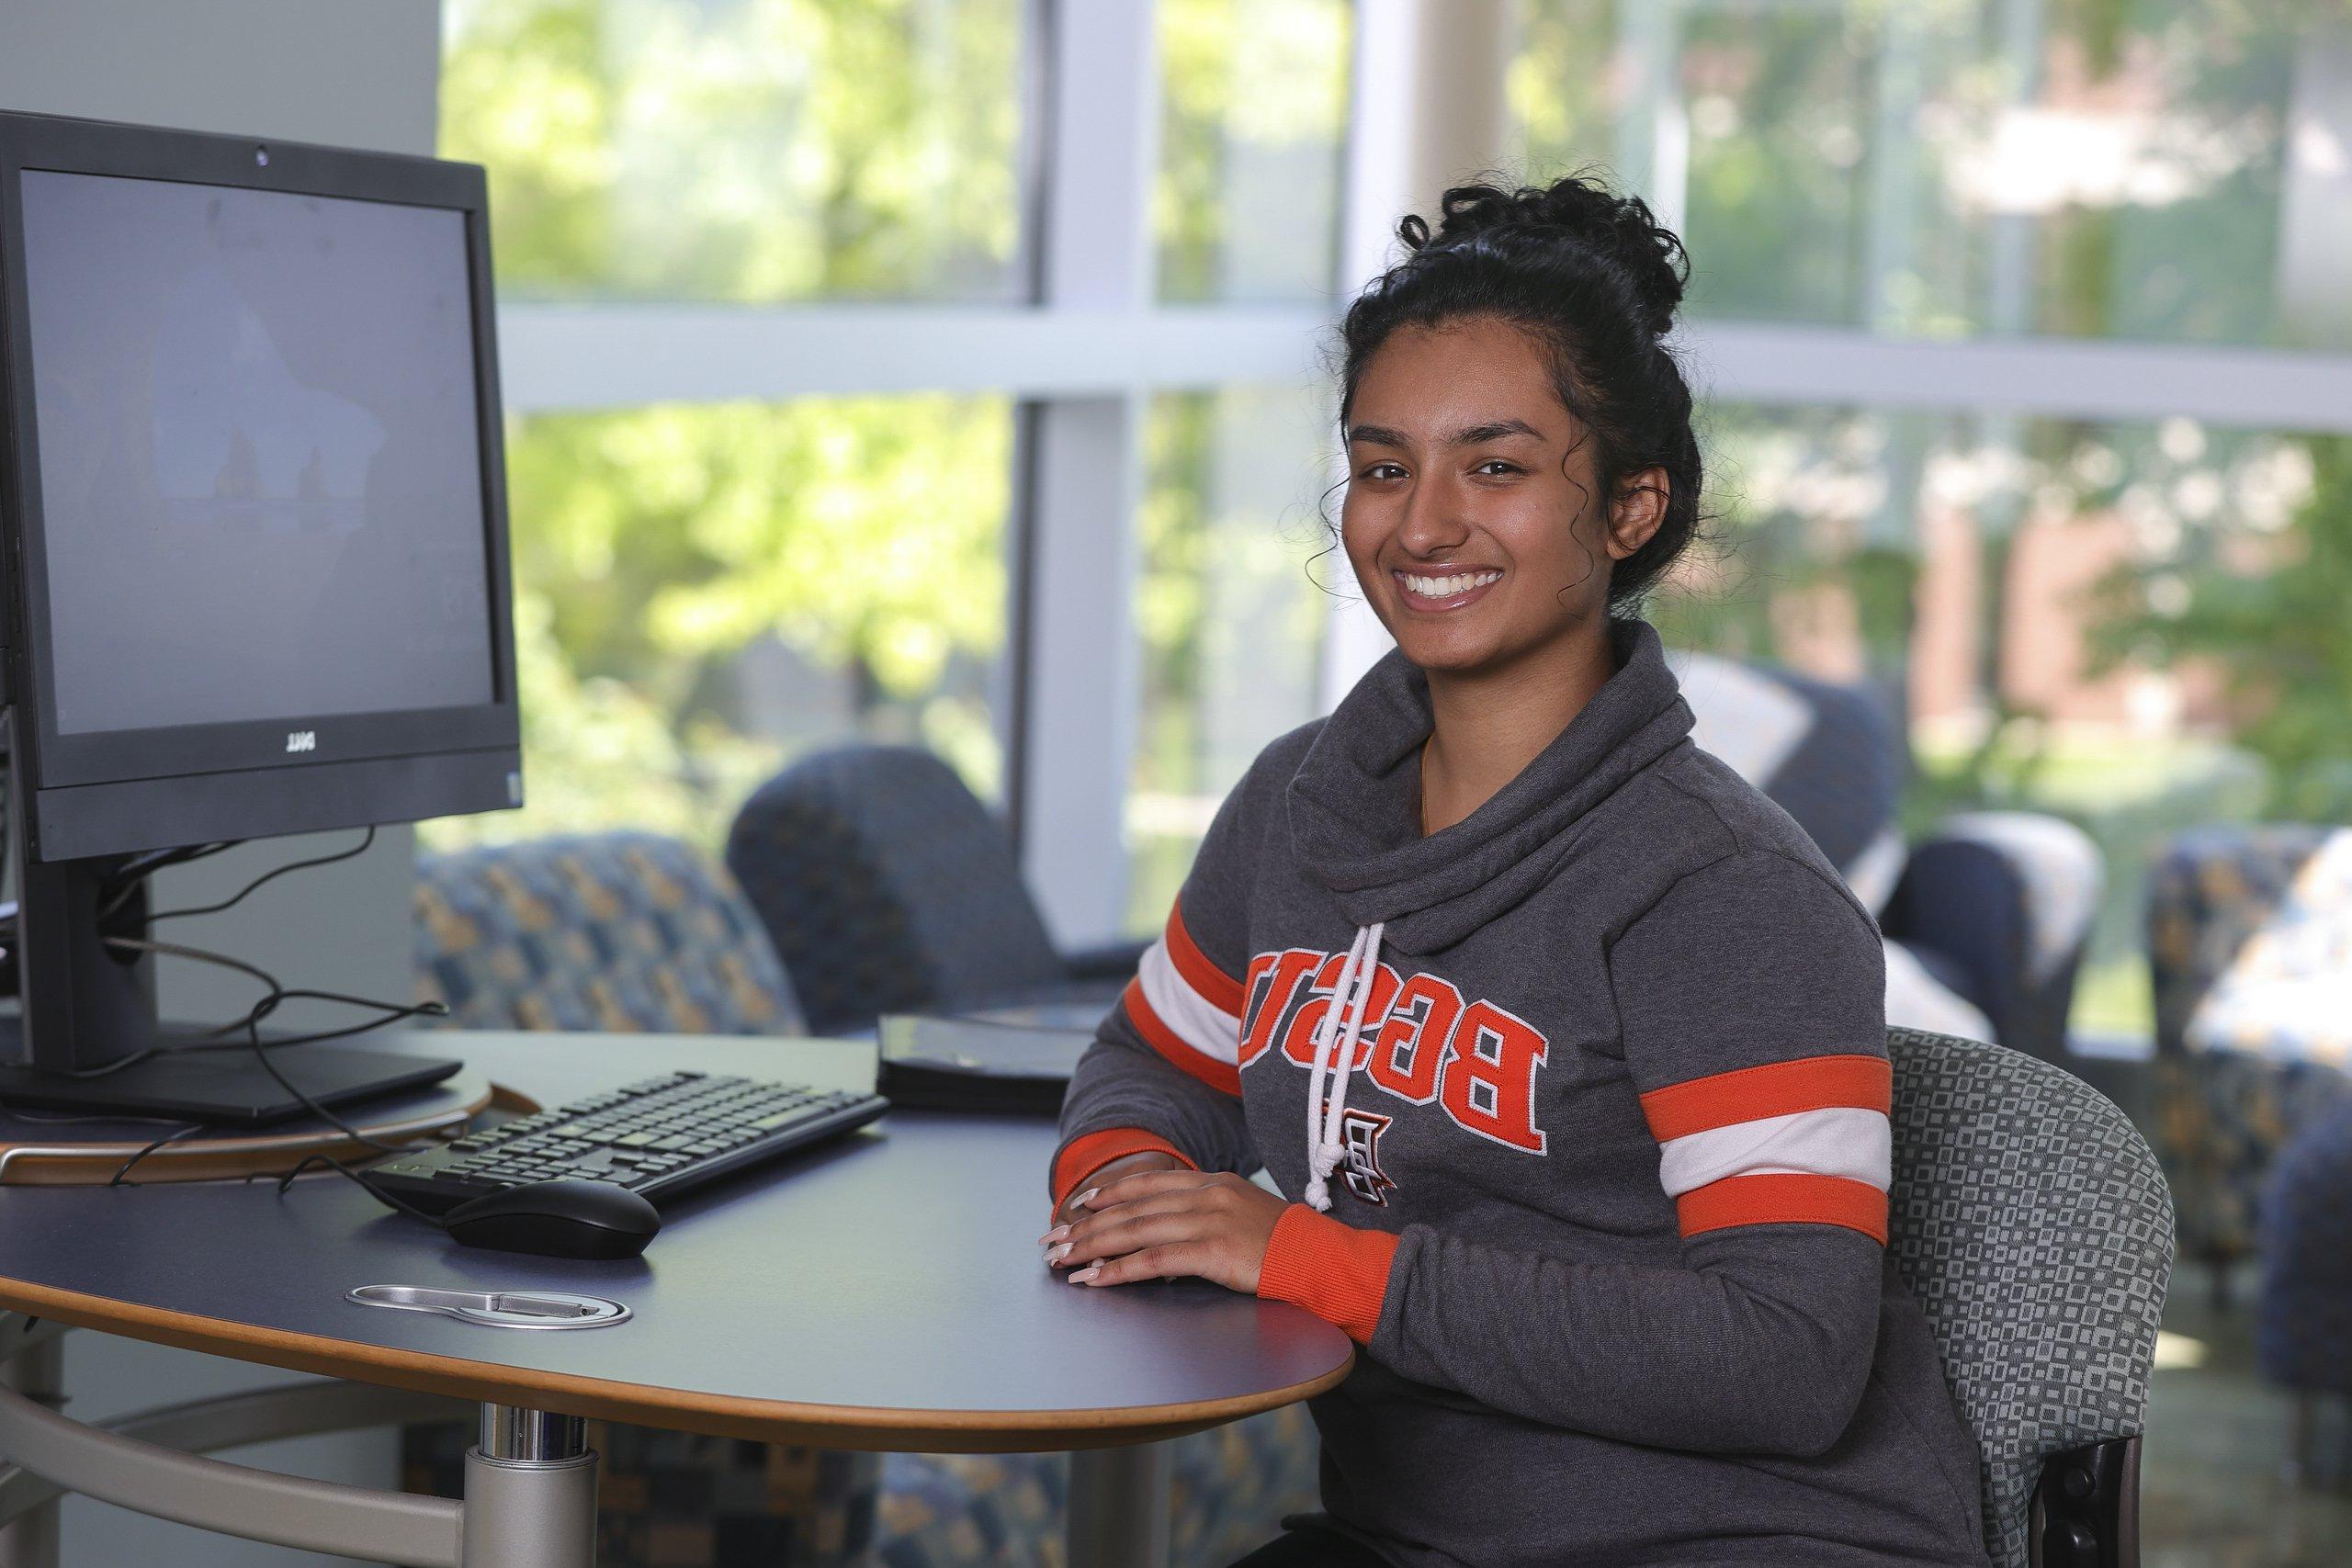 BGSU Firelands student gets hands-on education at the computer